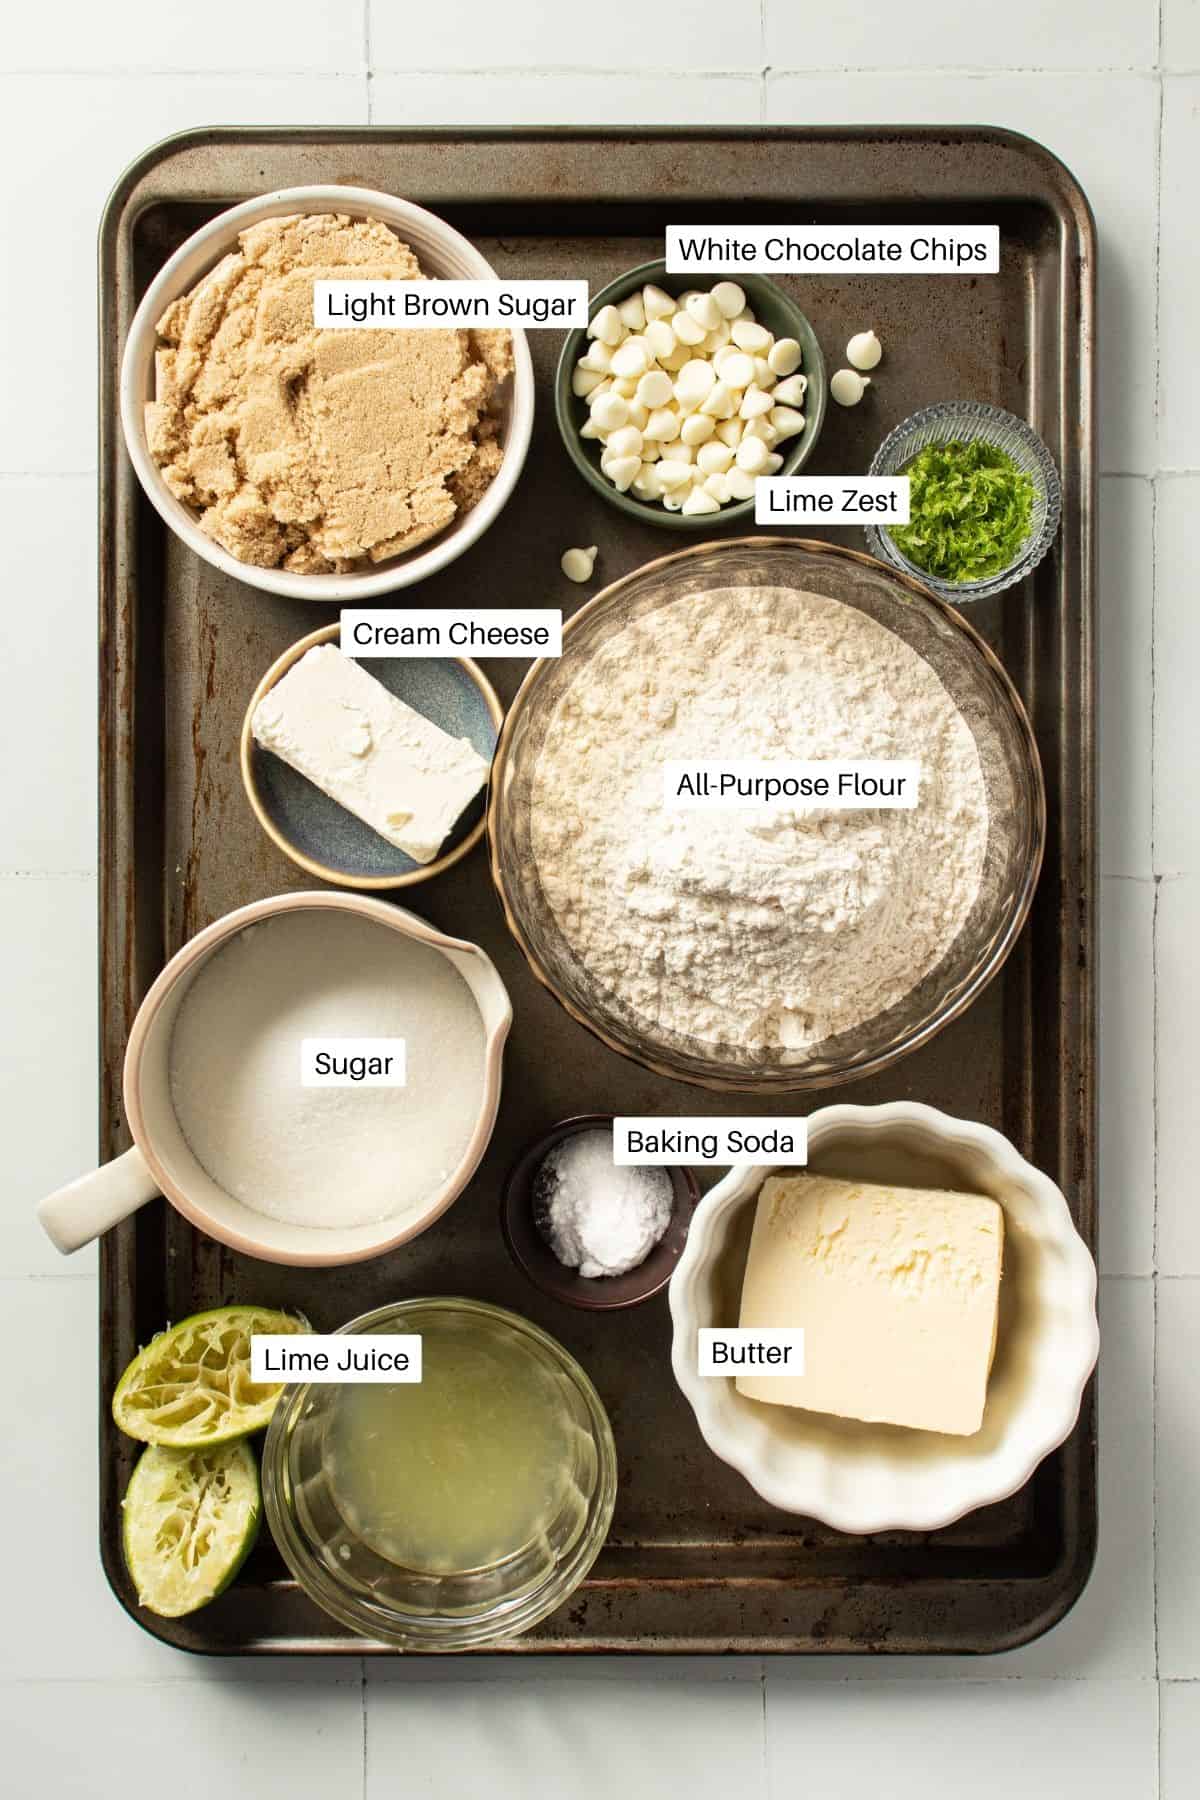 Ingredients on a tray including light brown sugar, lime juice, and cream cheese.